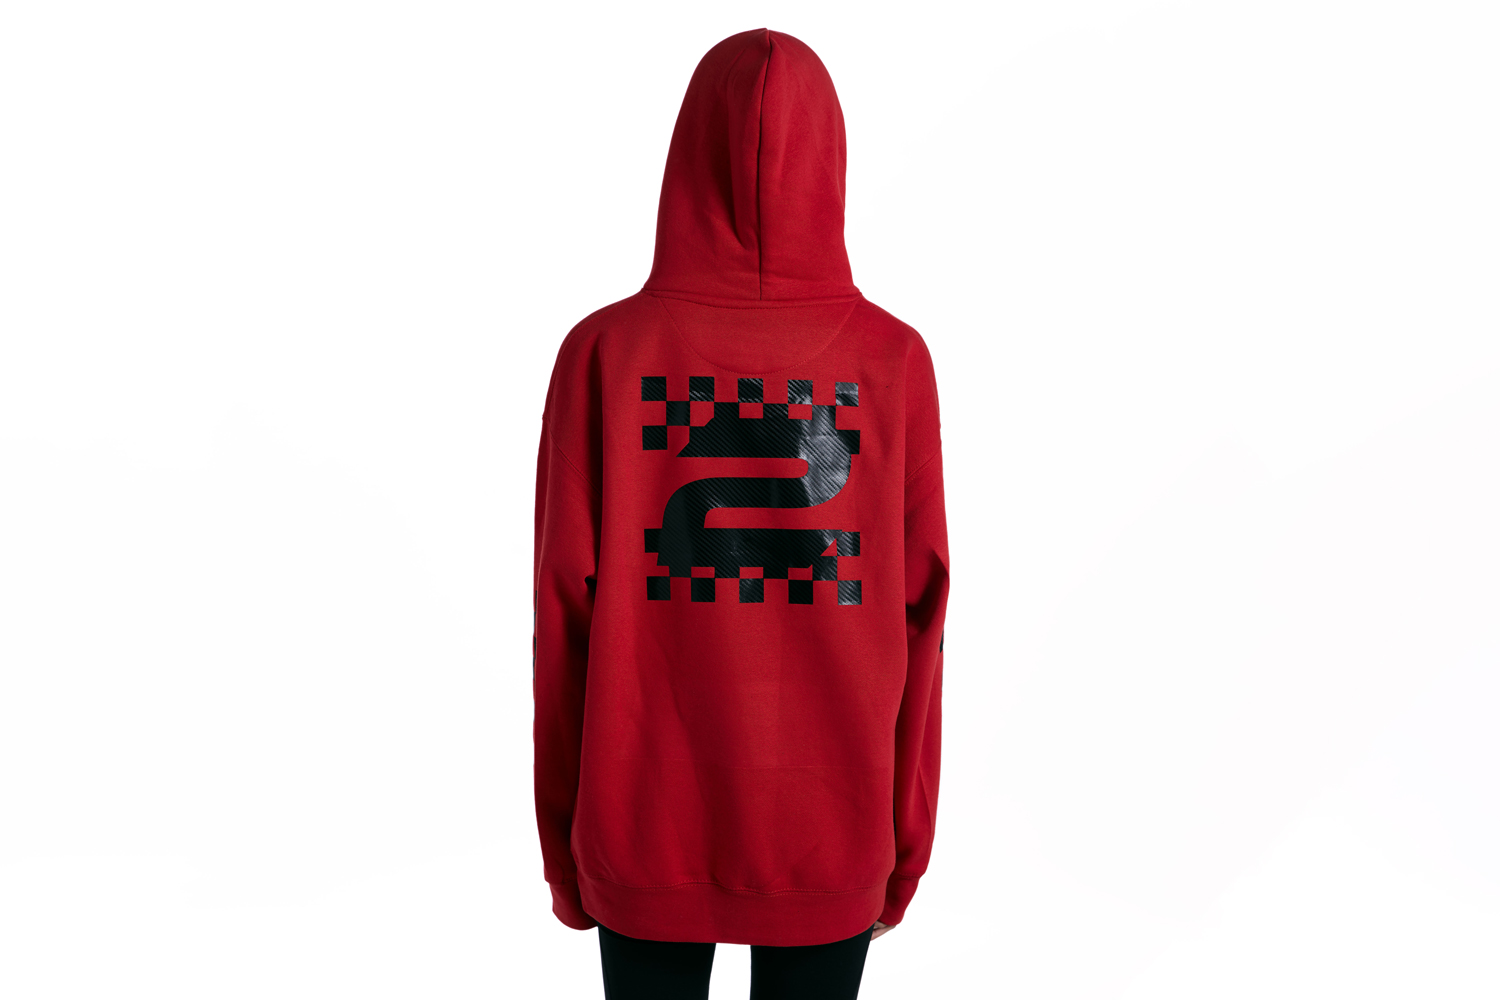 idris elba debuts new 2hr set fashion line inspired by dj culture chequered print hoodie back red